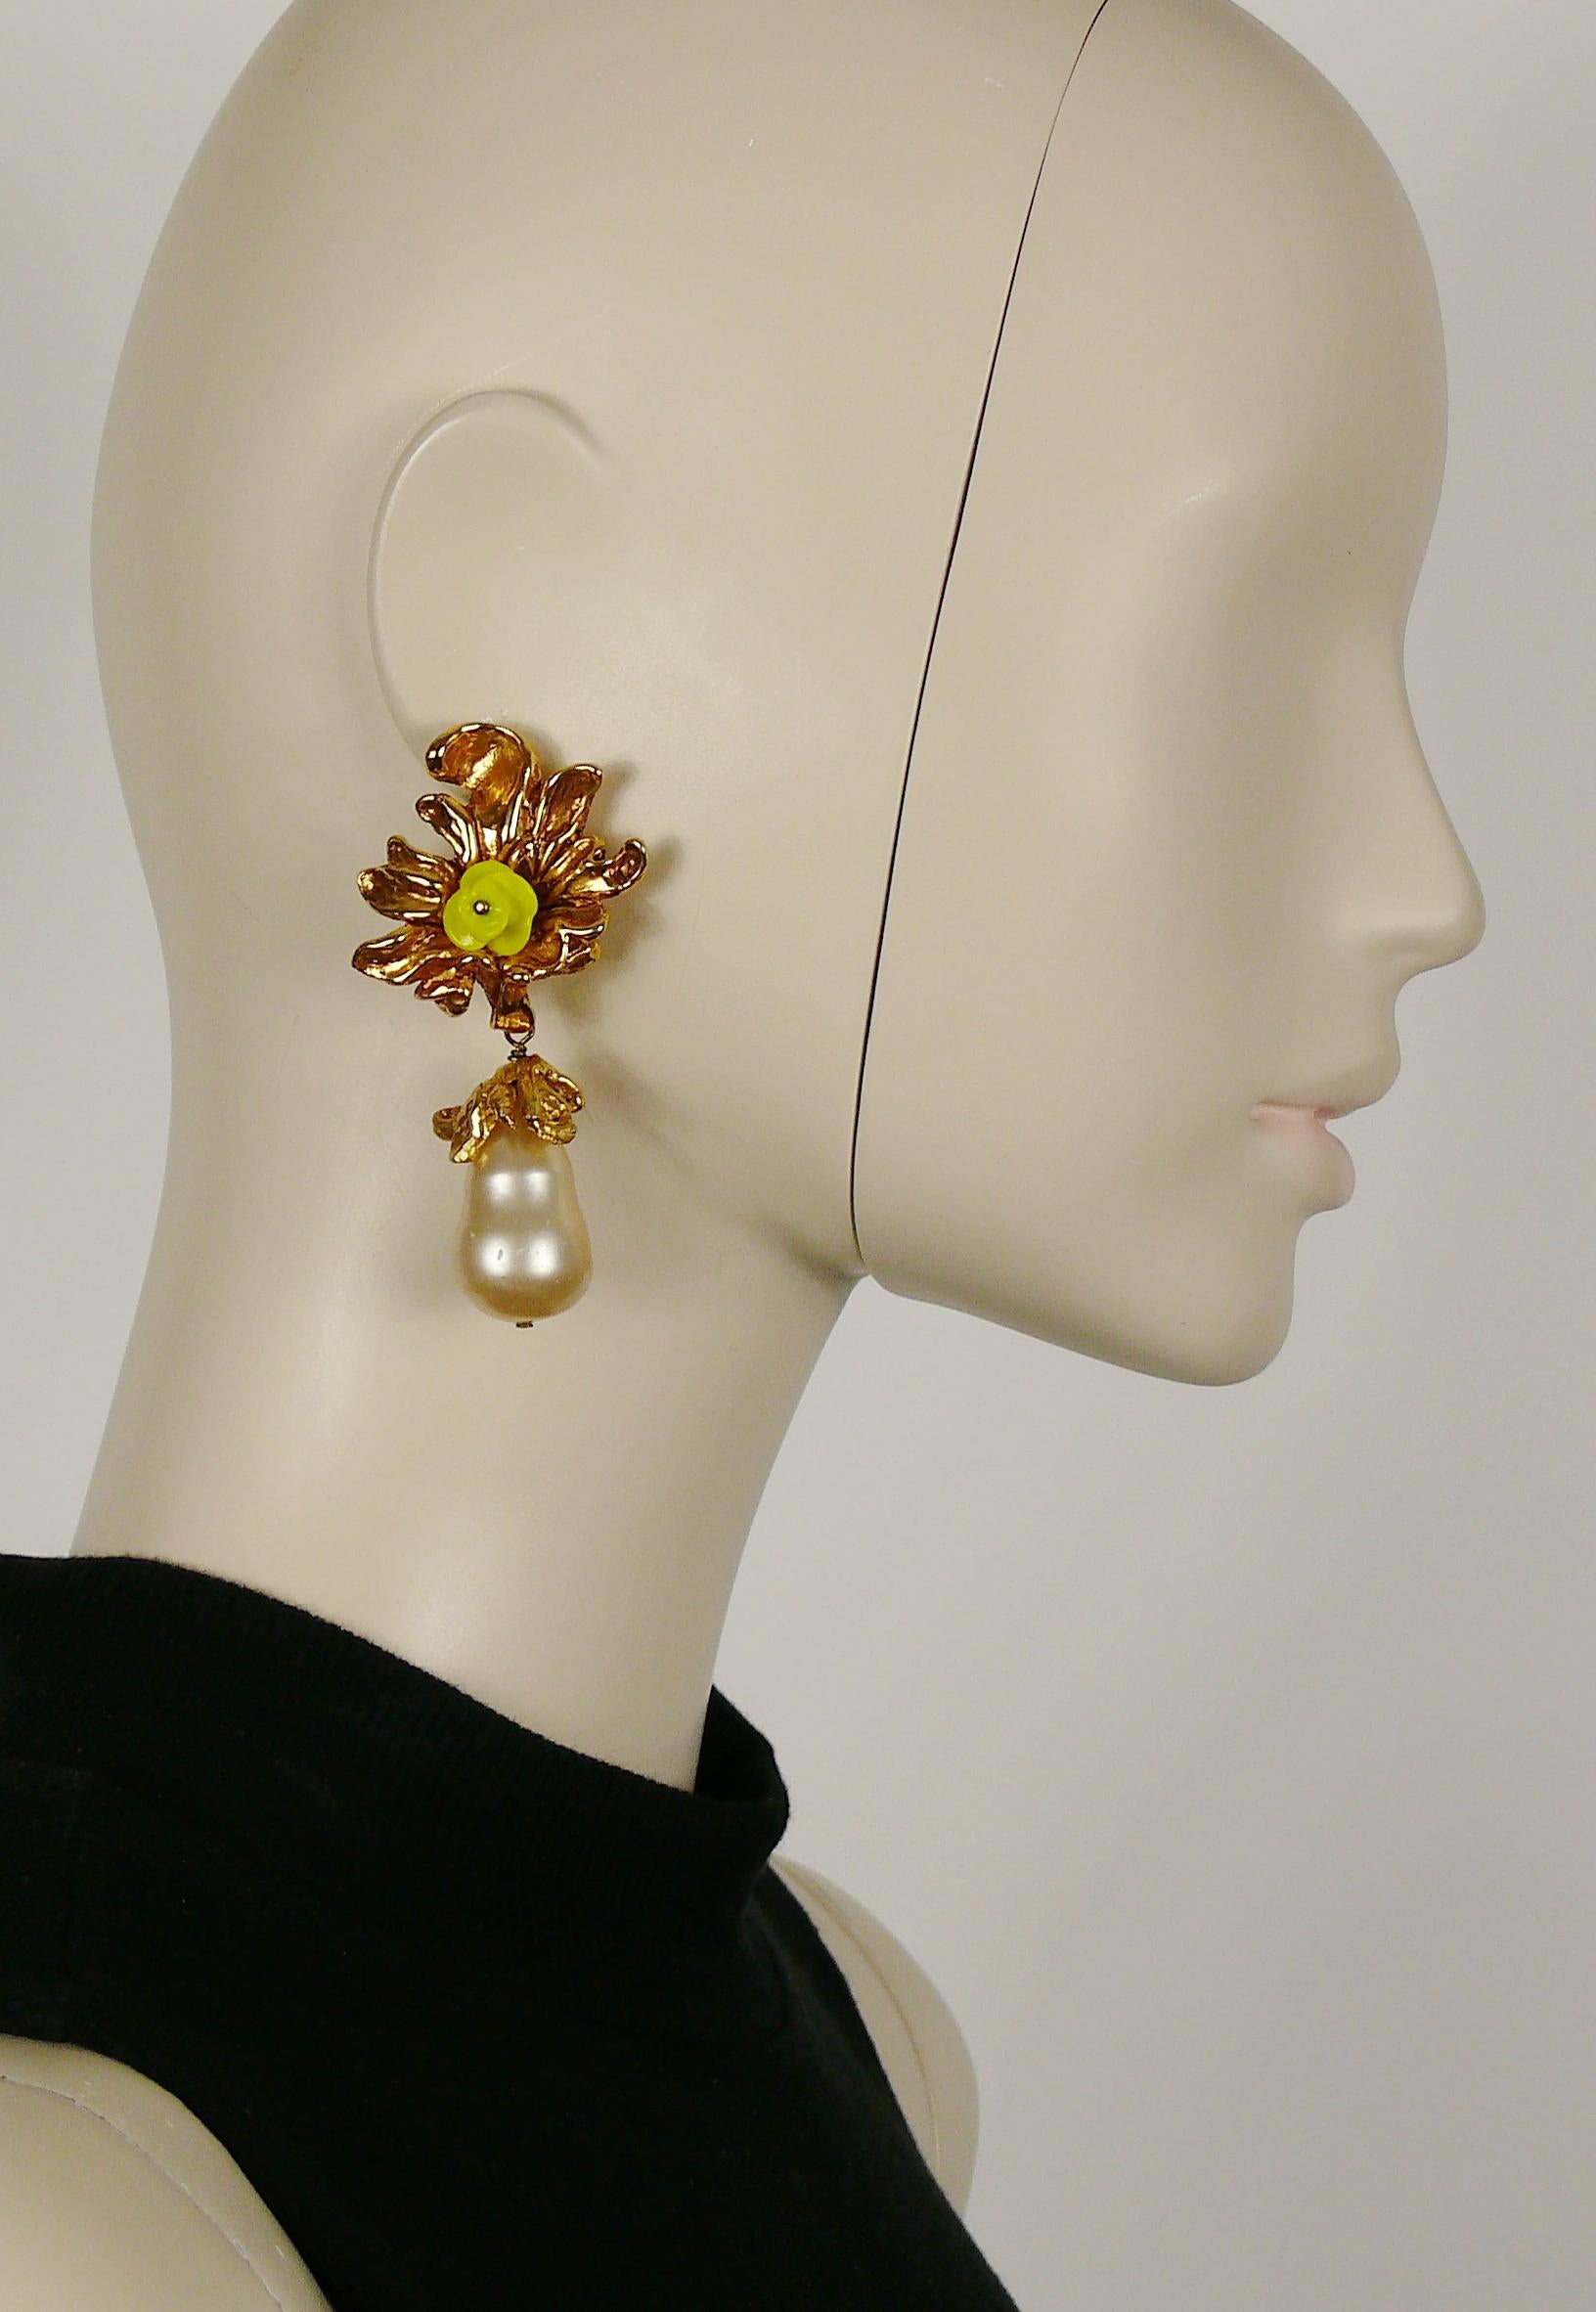 CHRISTIAN LACROIX vintage gold toned dangling earrings (clip-on) featuring a yellow resin flower and a large faux pearl teardrop.

Marked CHRISTIAN LACROIX CL Made in France.

Indicative measurements : height approx. 7.5 cm (2.95 inches) / max.